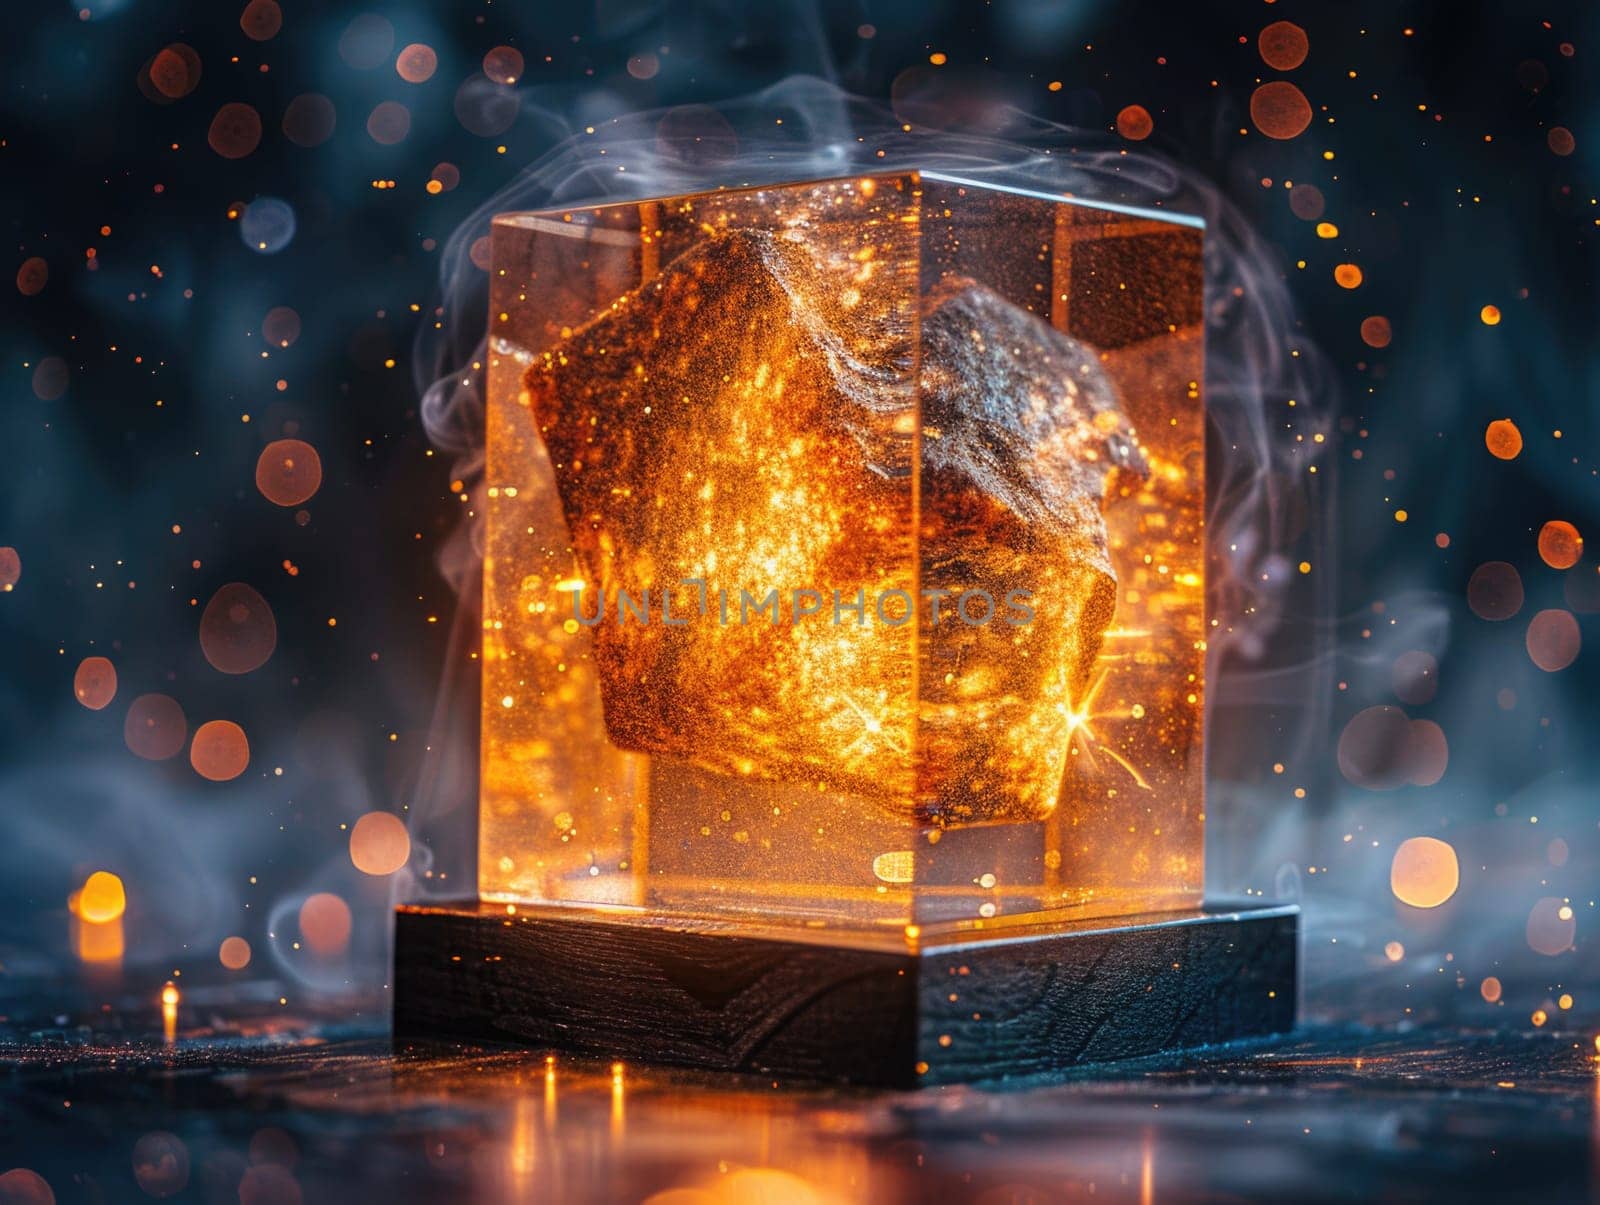 A sparkling, golden turkey under a glass dome, surrounded by magical, festive bokeh lights.